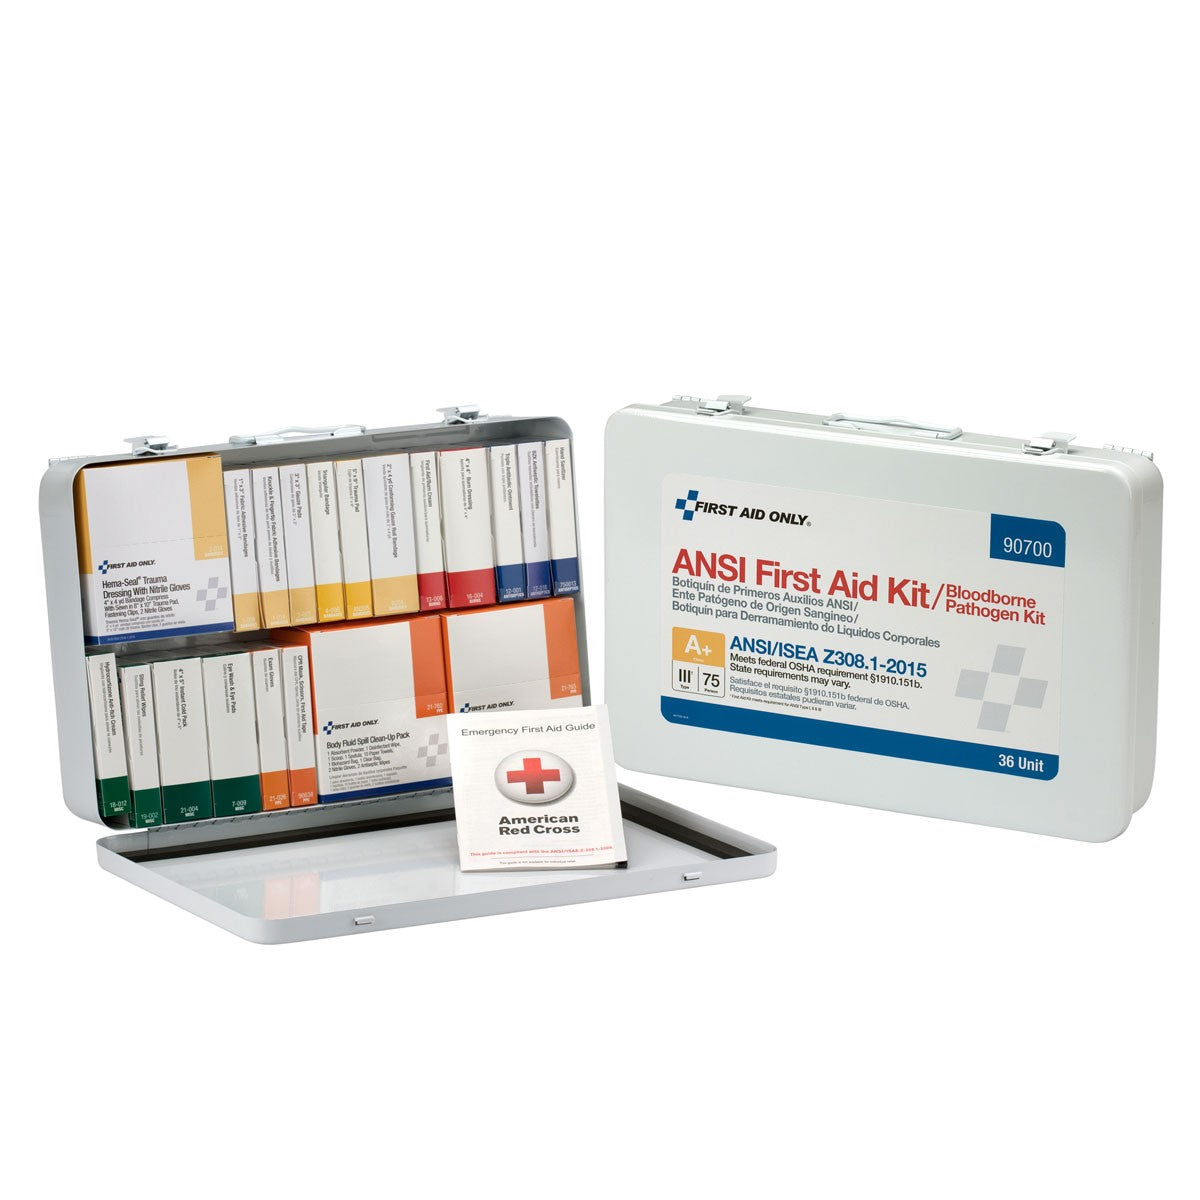 75 Person 36 Unit First Aid Kit, ANSI A+ Compliant With BBP (Blood Borne Pathogen) Pack, Weatherproof Steel Case, Type III - BS-FAK-90700-1-FM